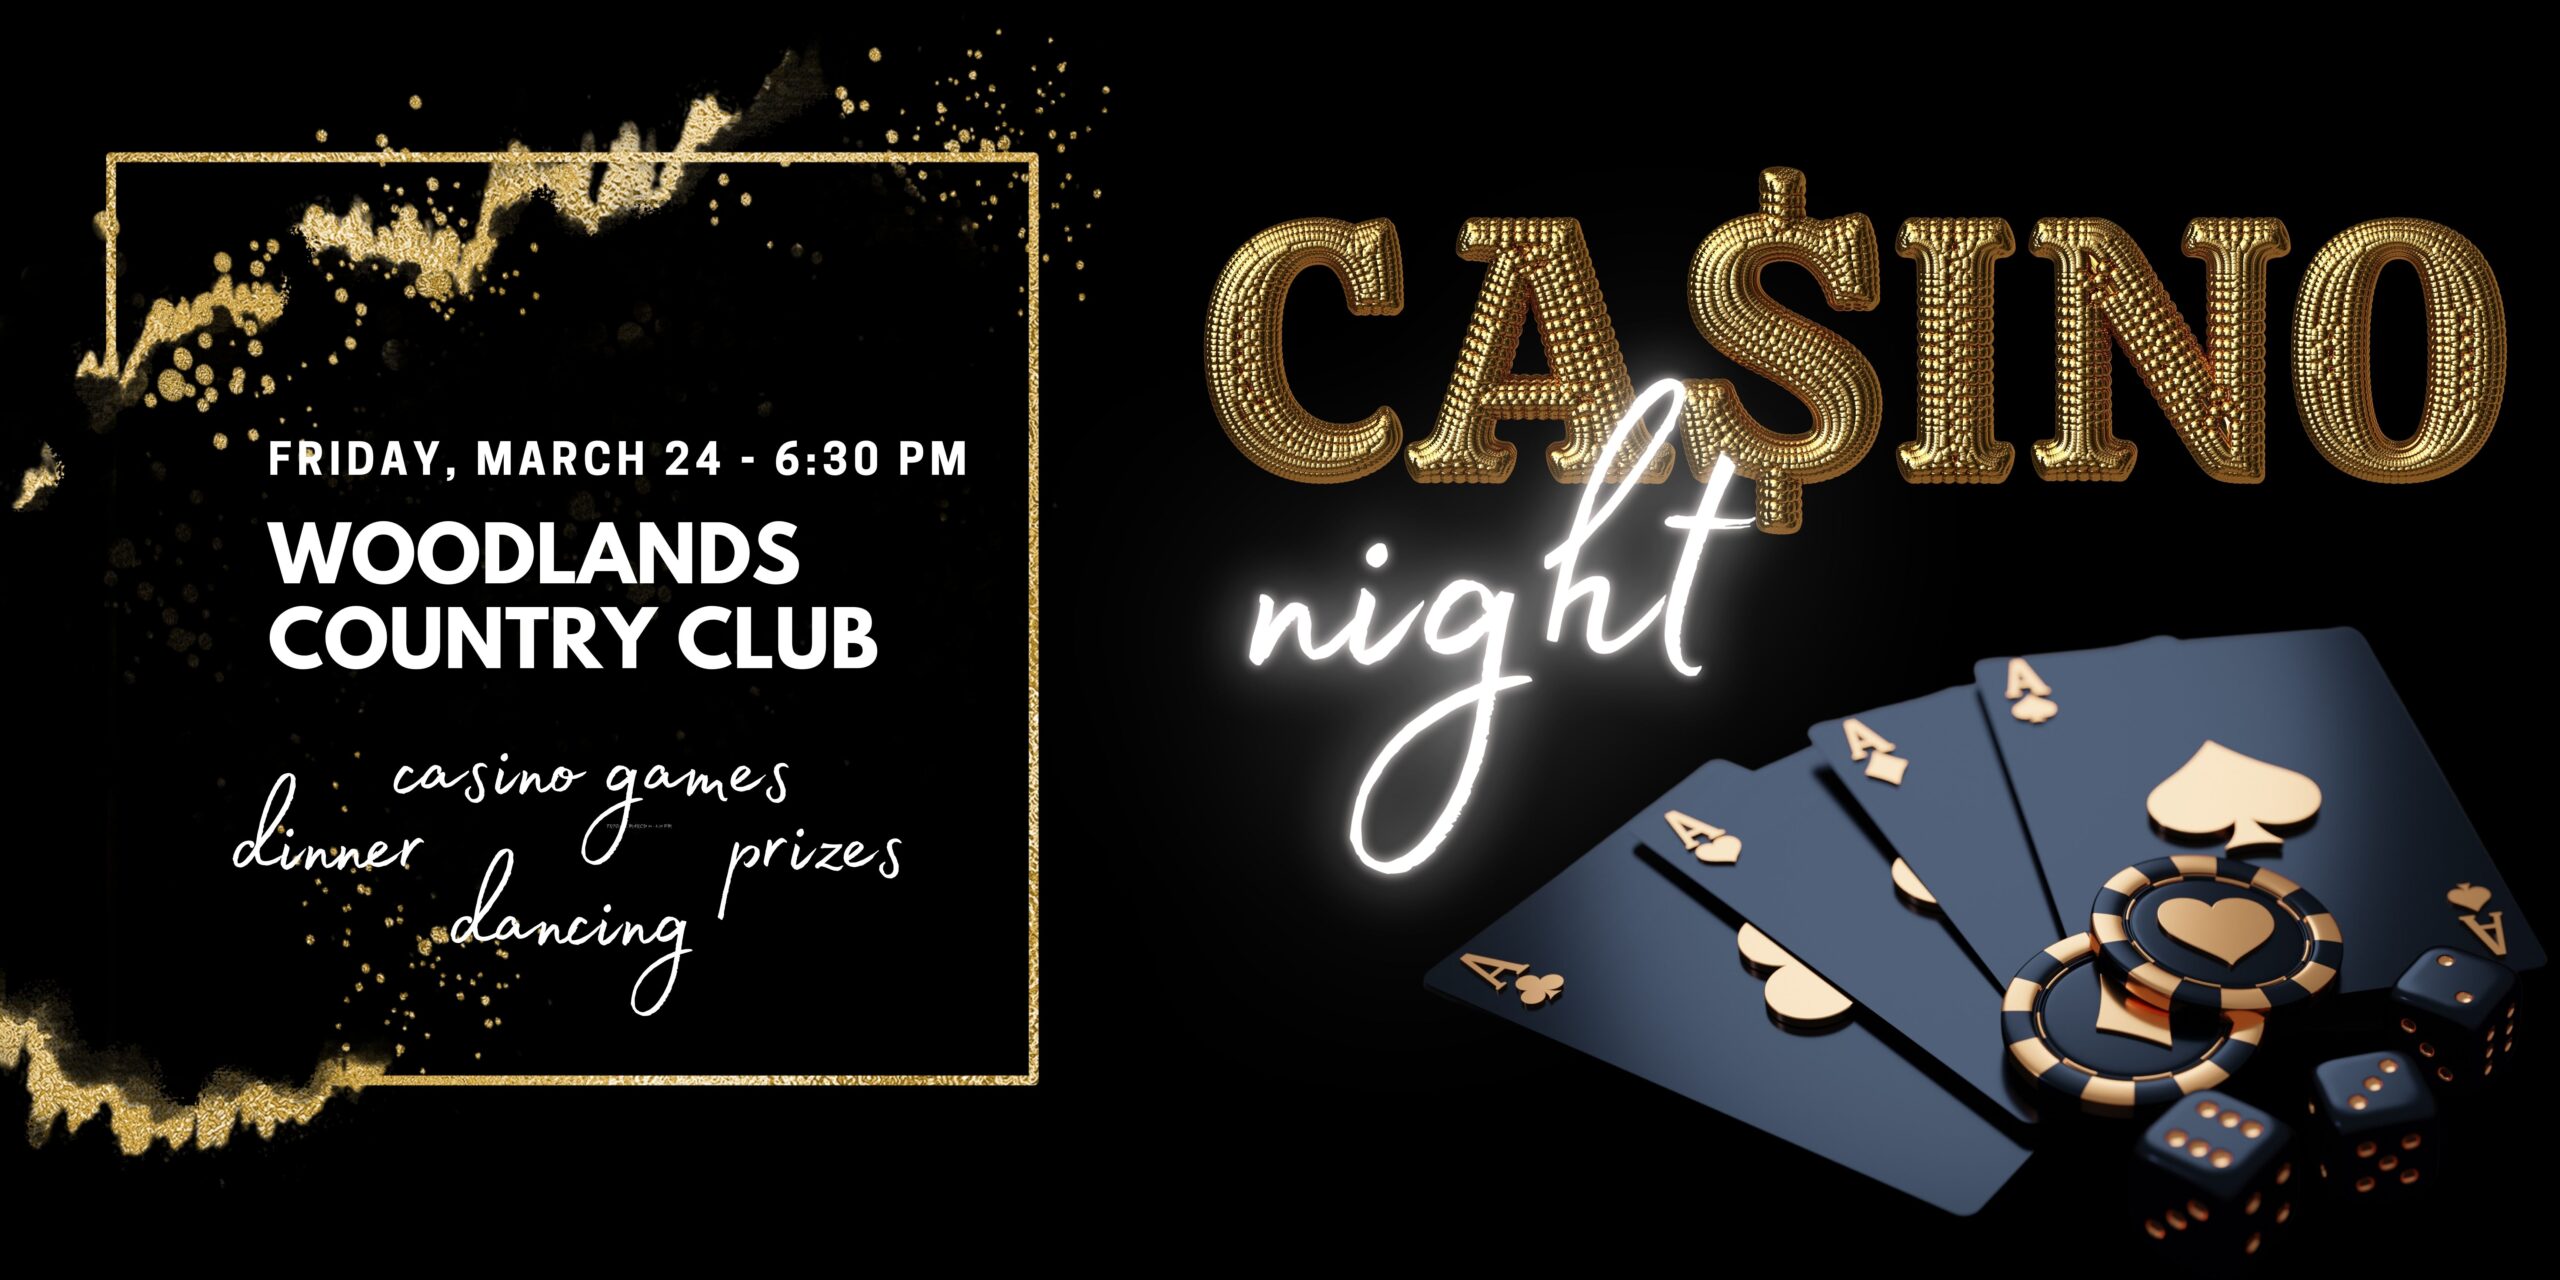 Allied Wealth Casino night image with information and casino themed graphics